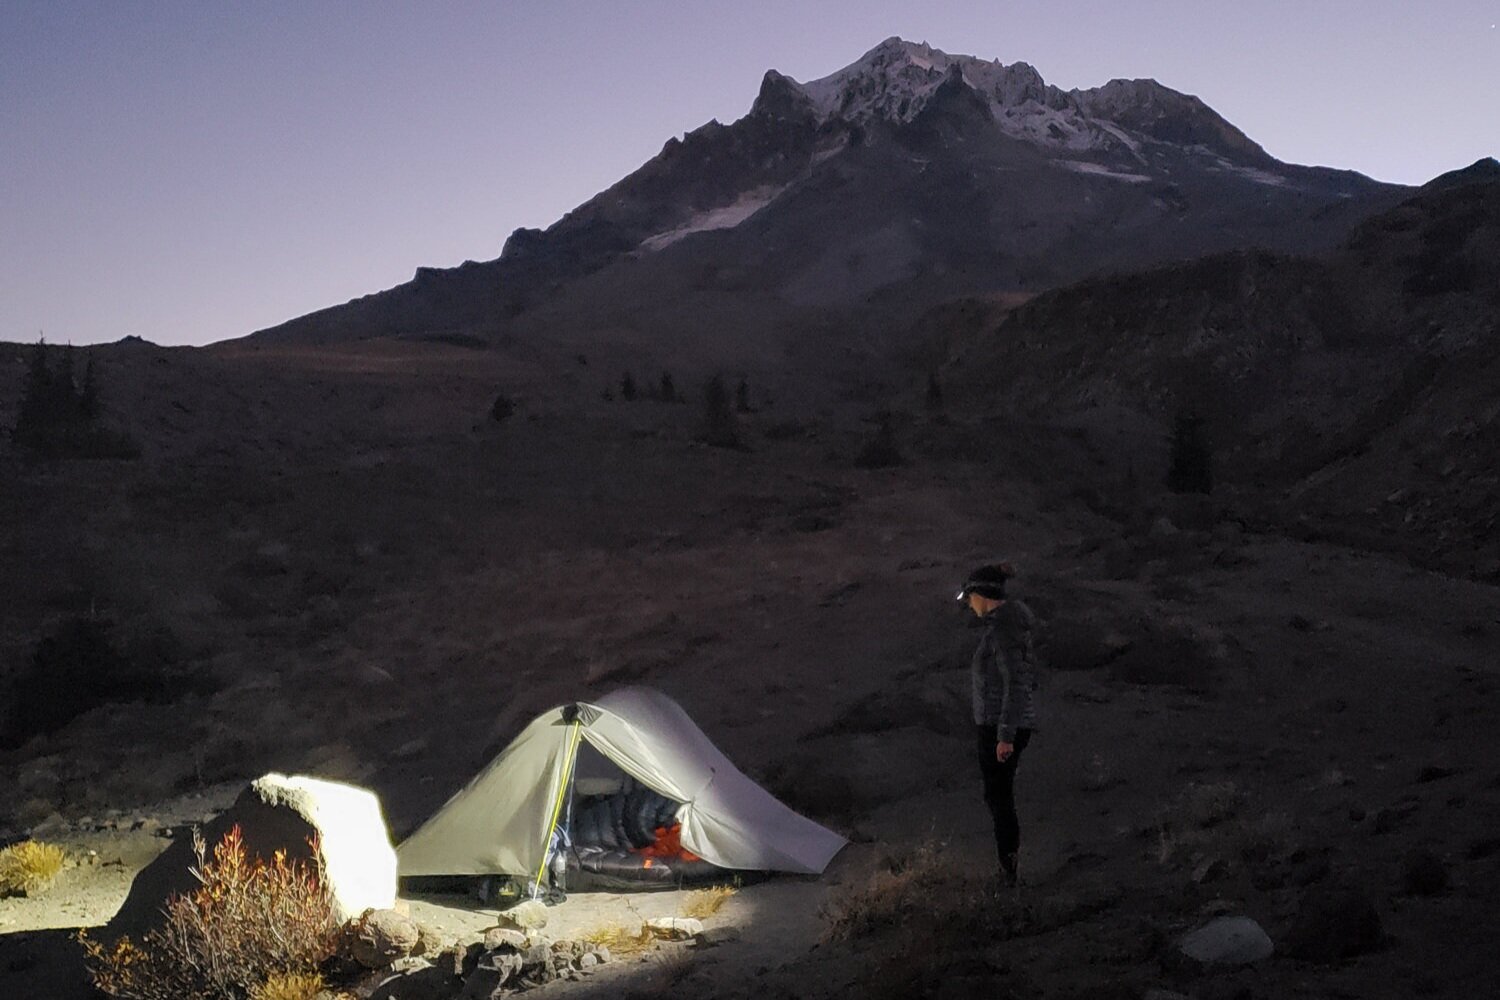 The super bright Fenix HM50R is great for dark and cold backpacking trips in fall and winter.